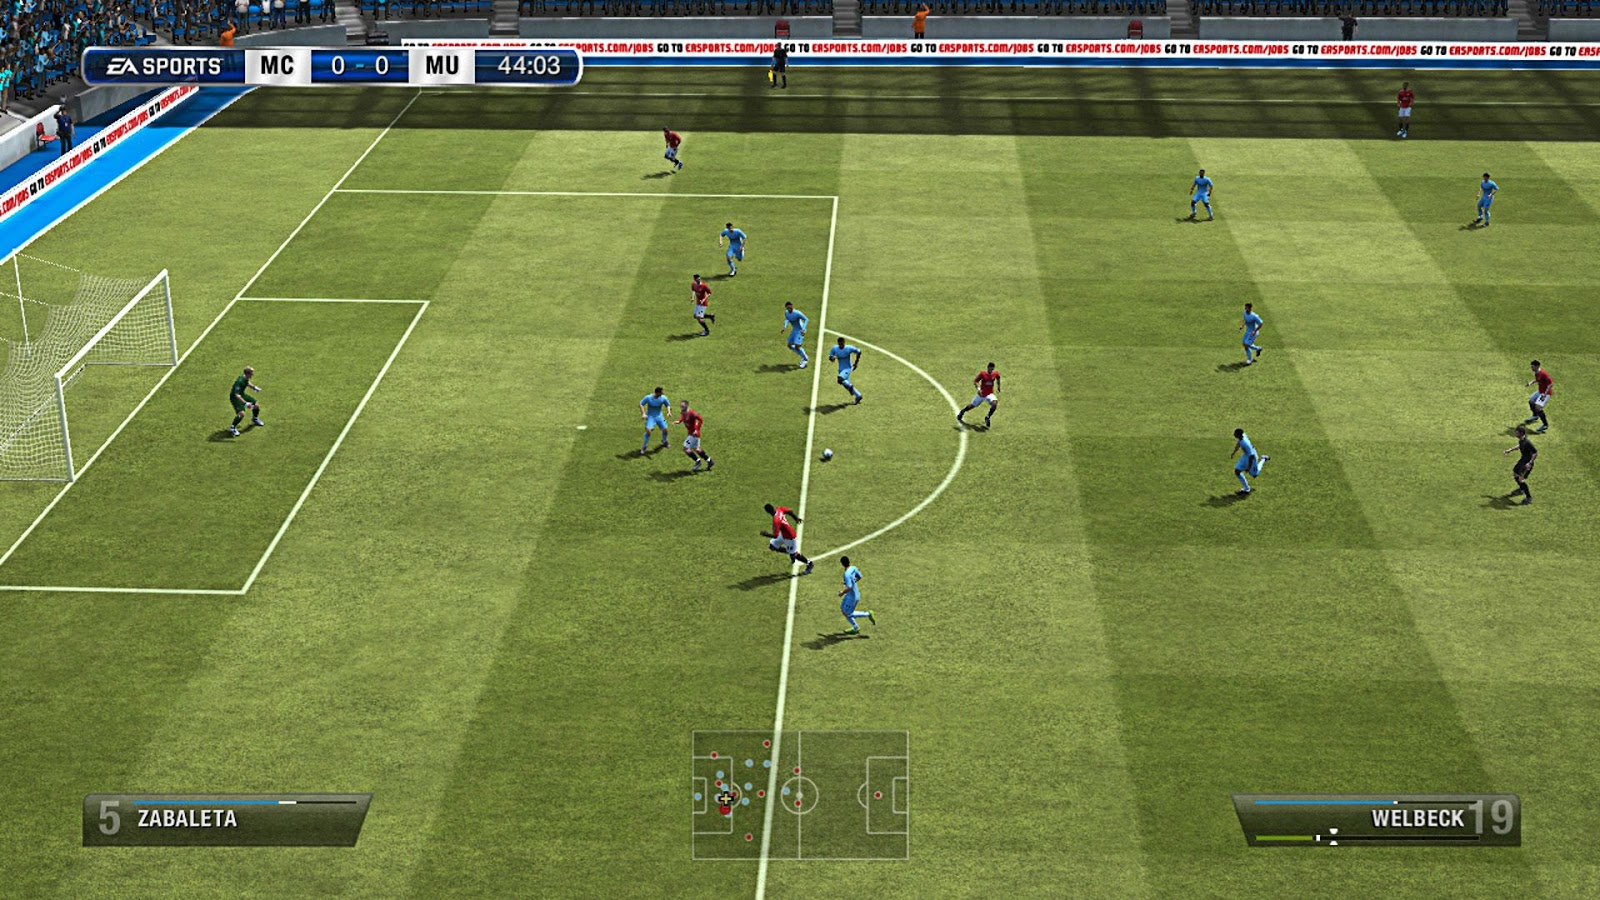 fifa online 2 download free